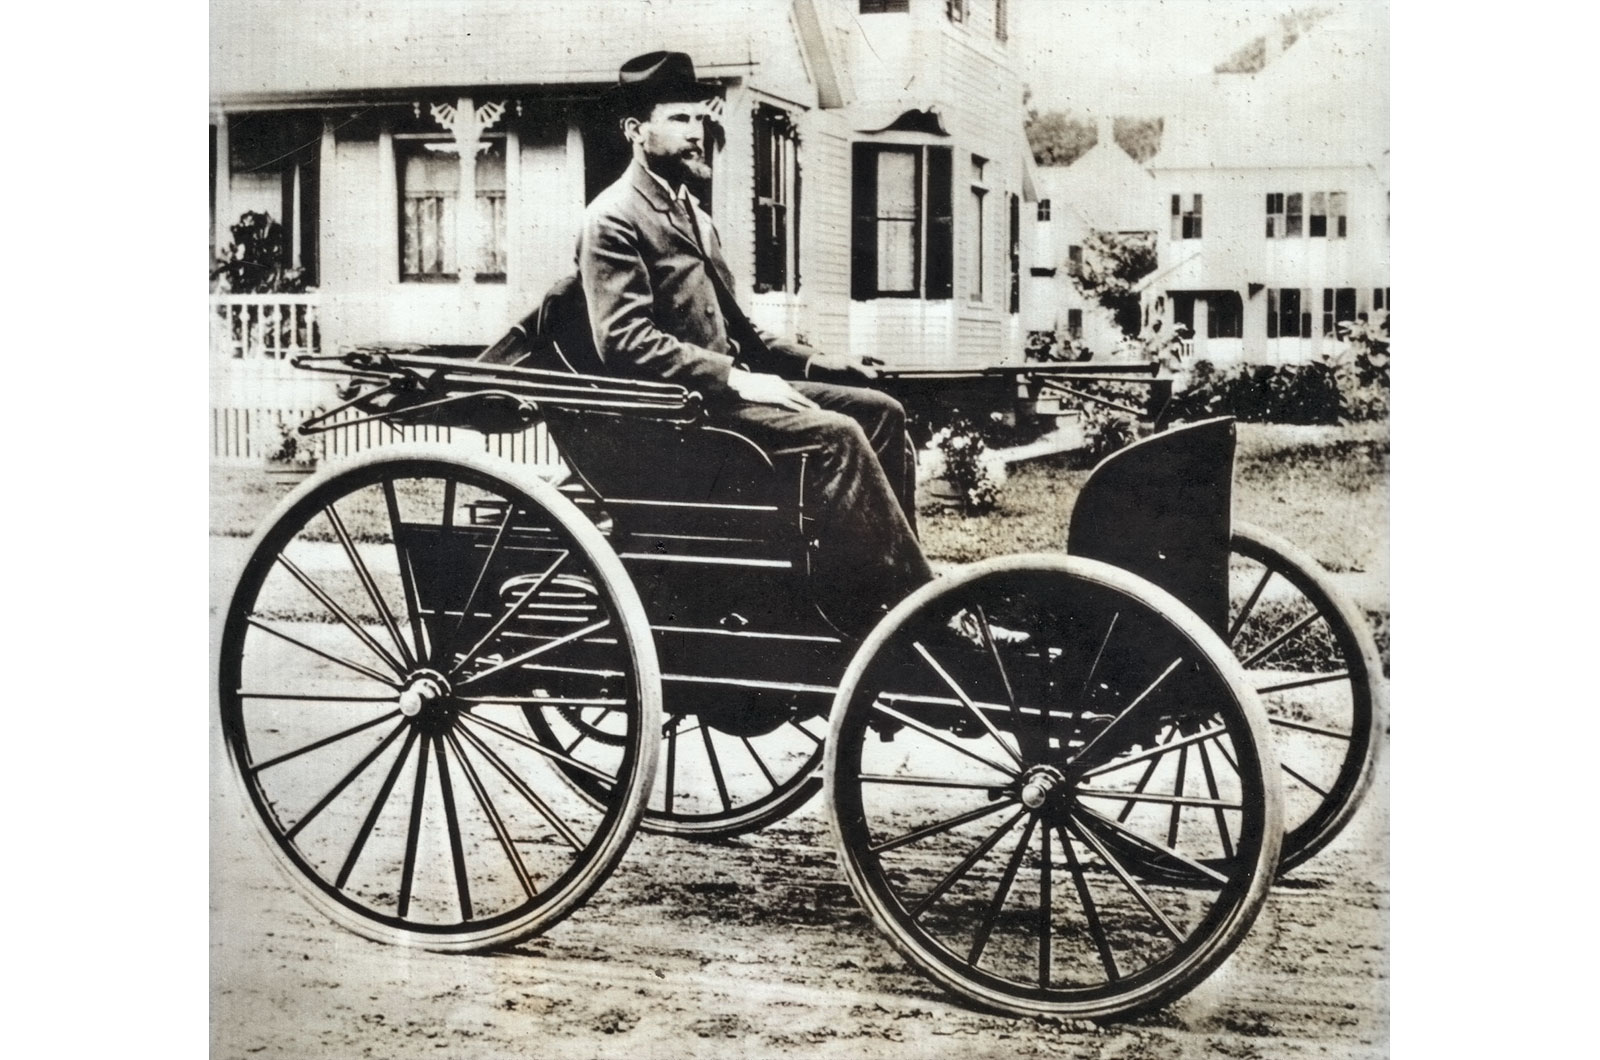 <p>The origins of American motor racing harken all the way back to <strong>November 28, 1895</strong>, when six vehicles lined up in Chicago for a 54-mile race to Evanston, Illinois, and back. Just two years earlier, brothers Charles and Frank Duryea built the “Road Wagon,” the first-ever American-made gasoline-powered automobile. It didn’t take them too long to wonder, “Hmm, maybe we should race this thing.”</p><p>10 hours after the vehicles left the starting line, the Duryea Motor “Road Wagon” crossed the finish line, clocking in at 7.3 mph and winning the $2000 prize money. America’s inaugural road race was won with a single cylinder and just four horsepower.</p>